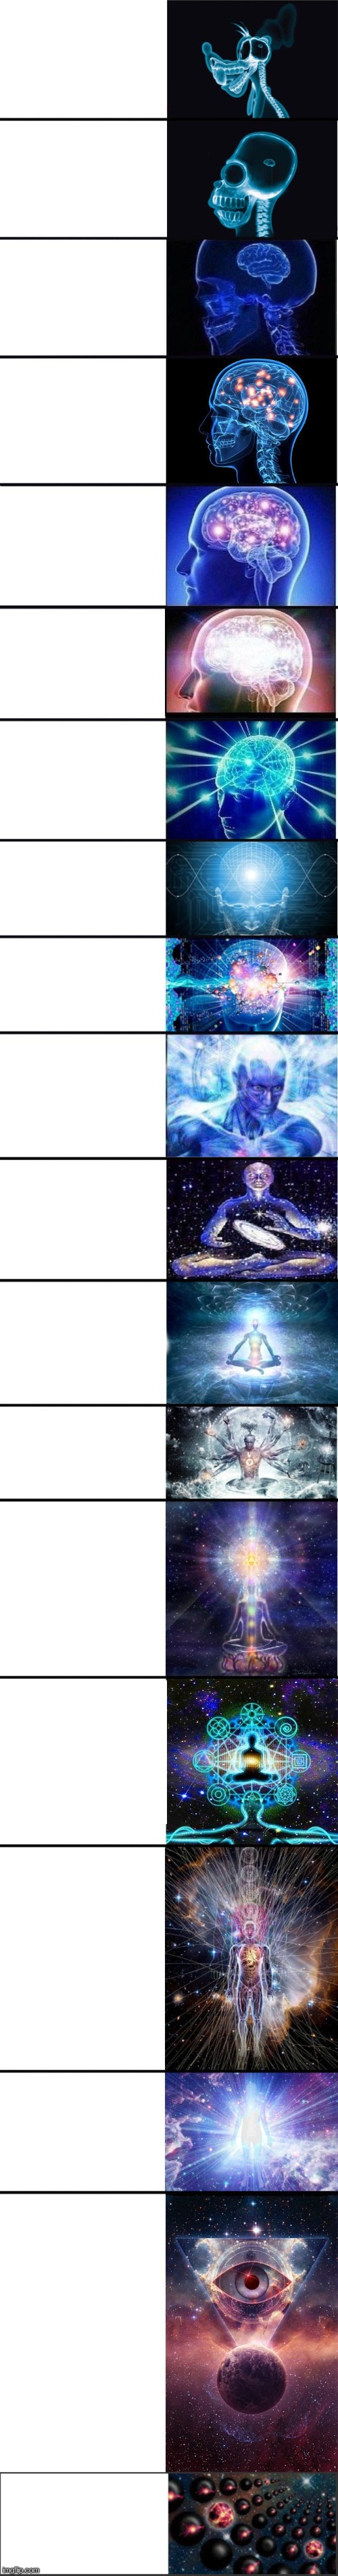 A bigger version of expanding brain from me (the final spot) | image tagged in expanding brain 9001 | made w/ Imgflip meme maker